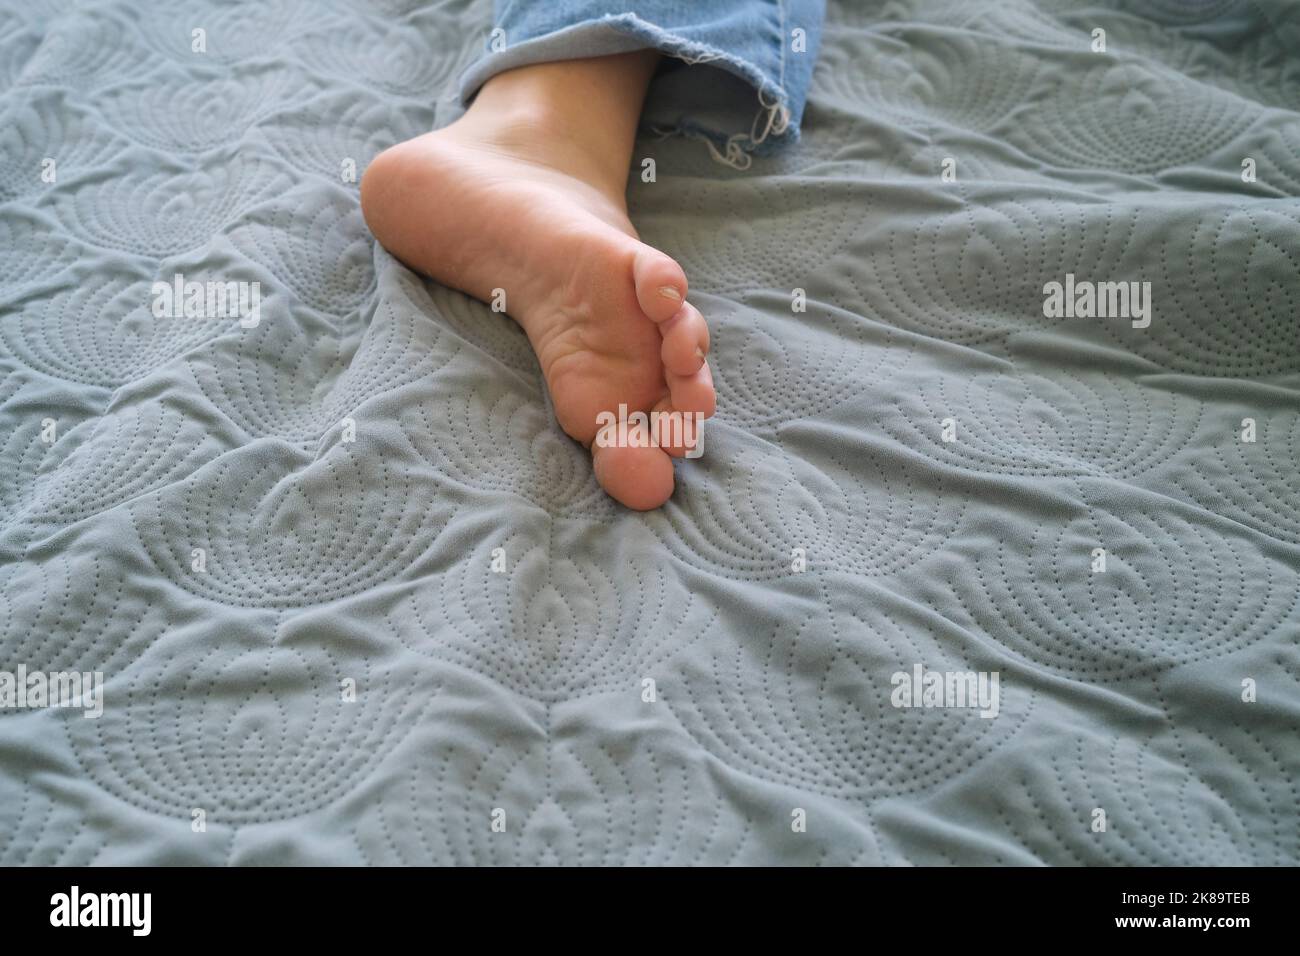 female foot on bed cover Stock Photo